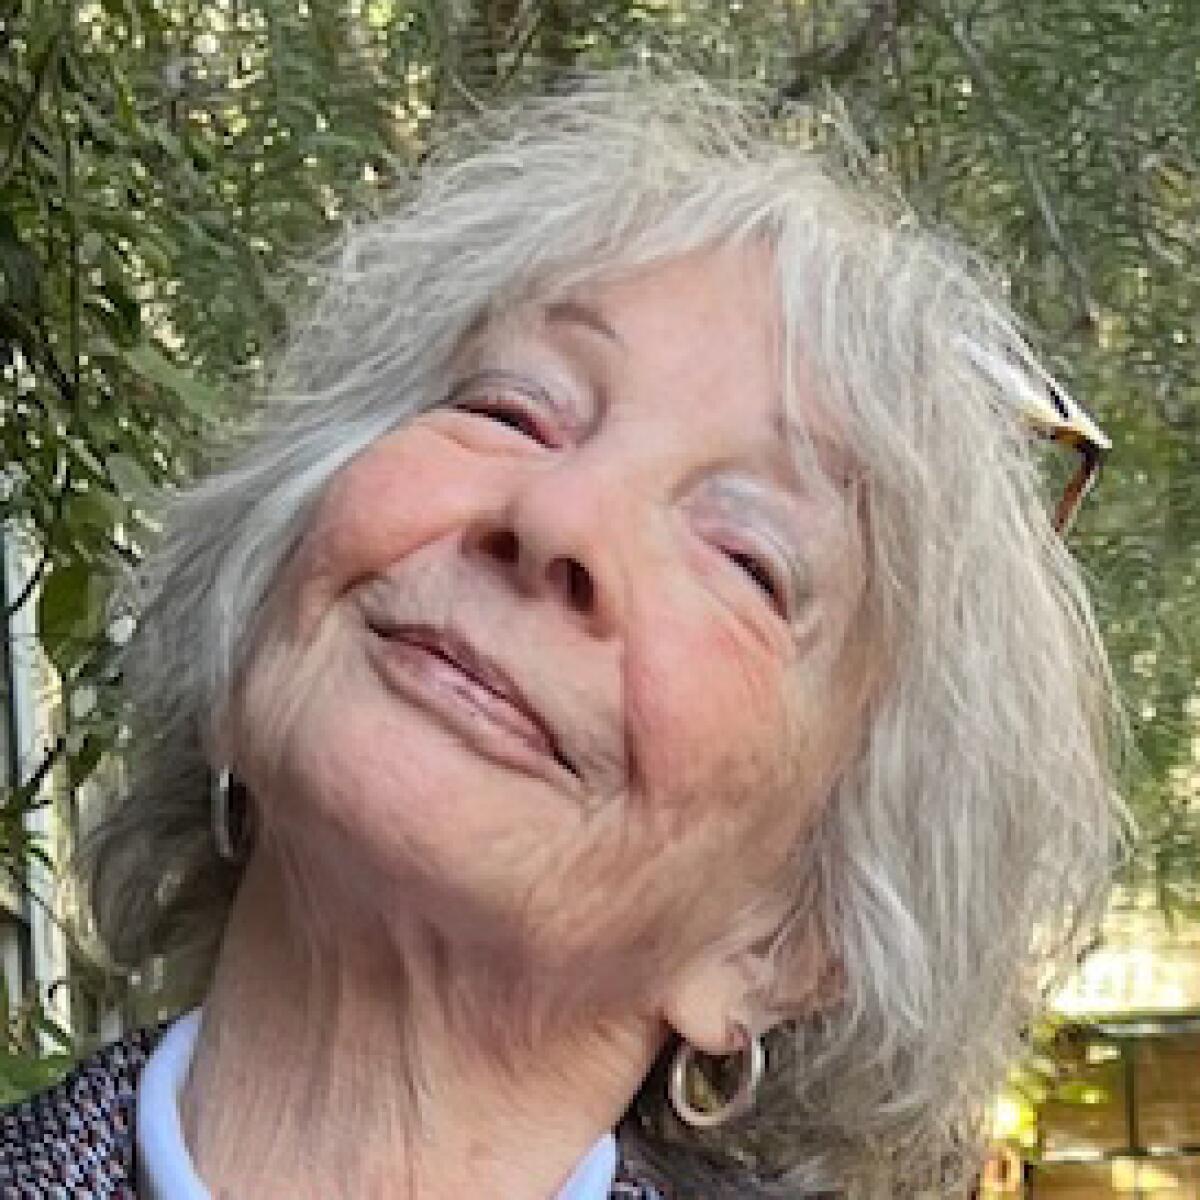 An older woman with short gray hair smiles slightly in a selfie in front of a tree